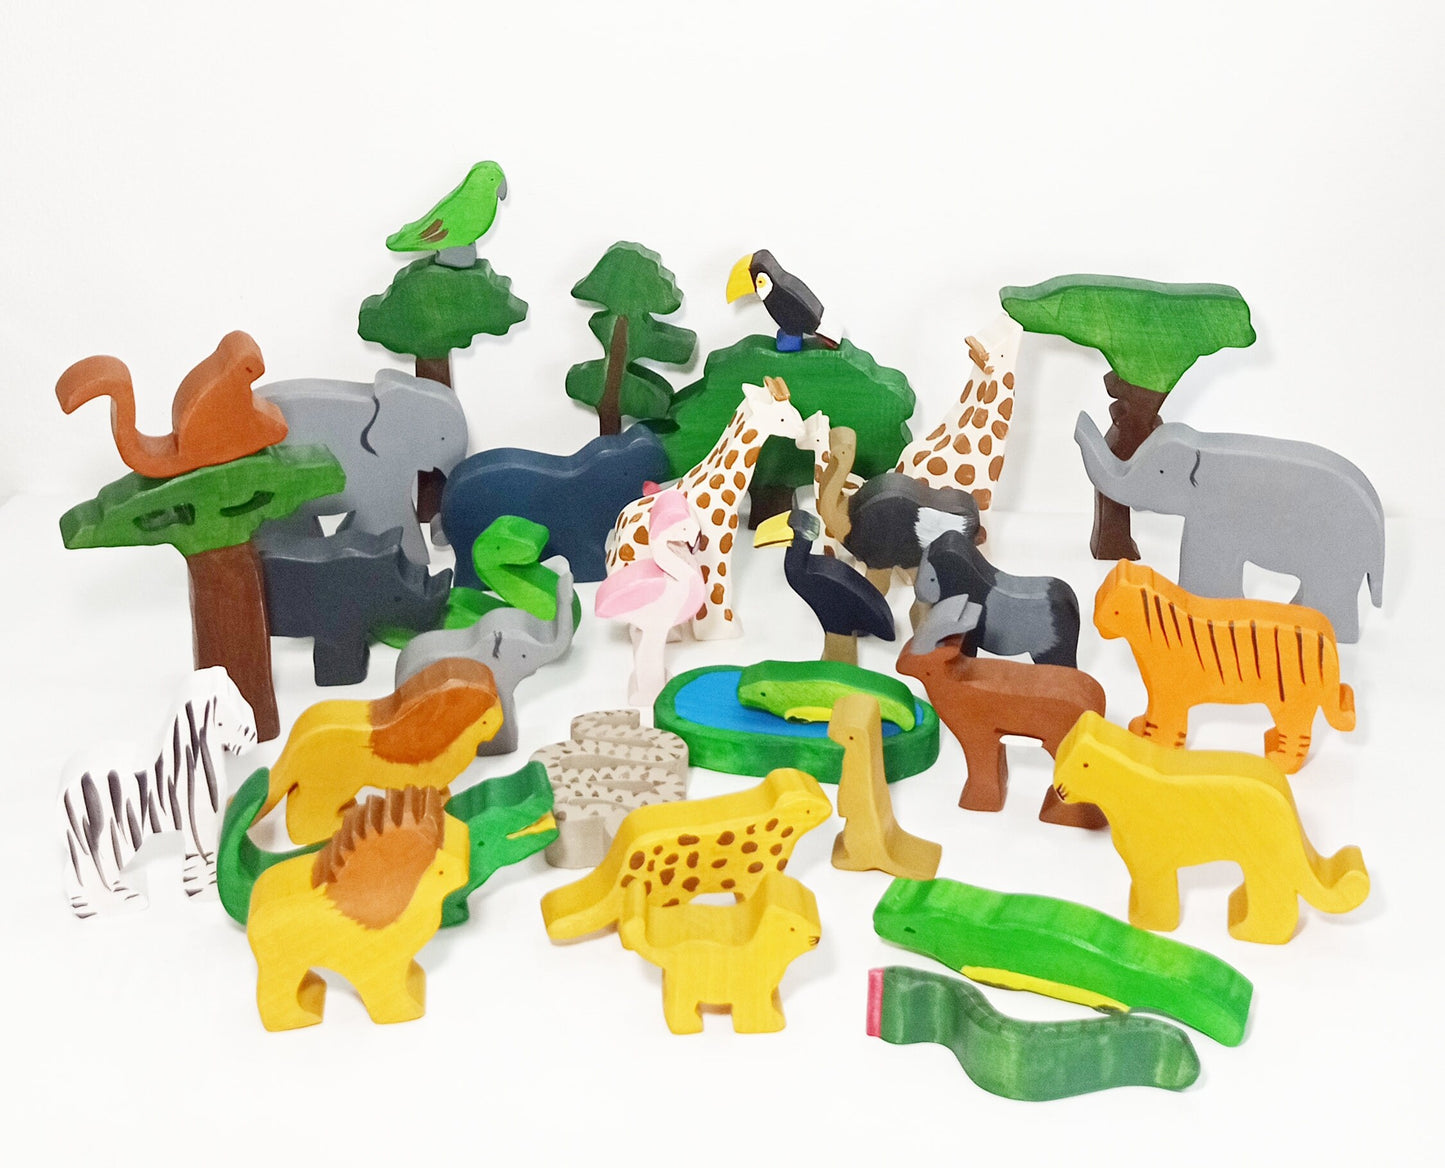 Safari exotic animals wooden toy 36pieces set, wooden animals toy set, waldorf inspired wooden animals, christmas birthday gift for kids